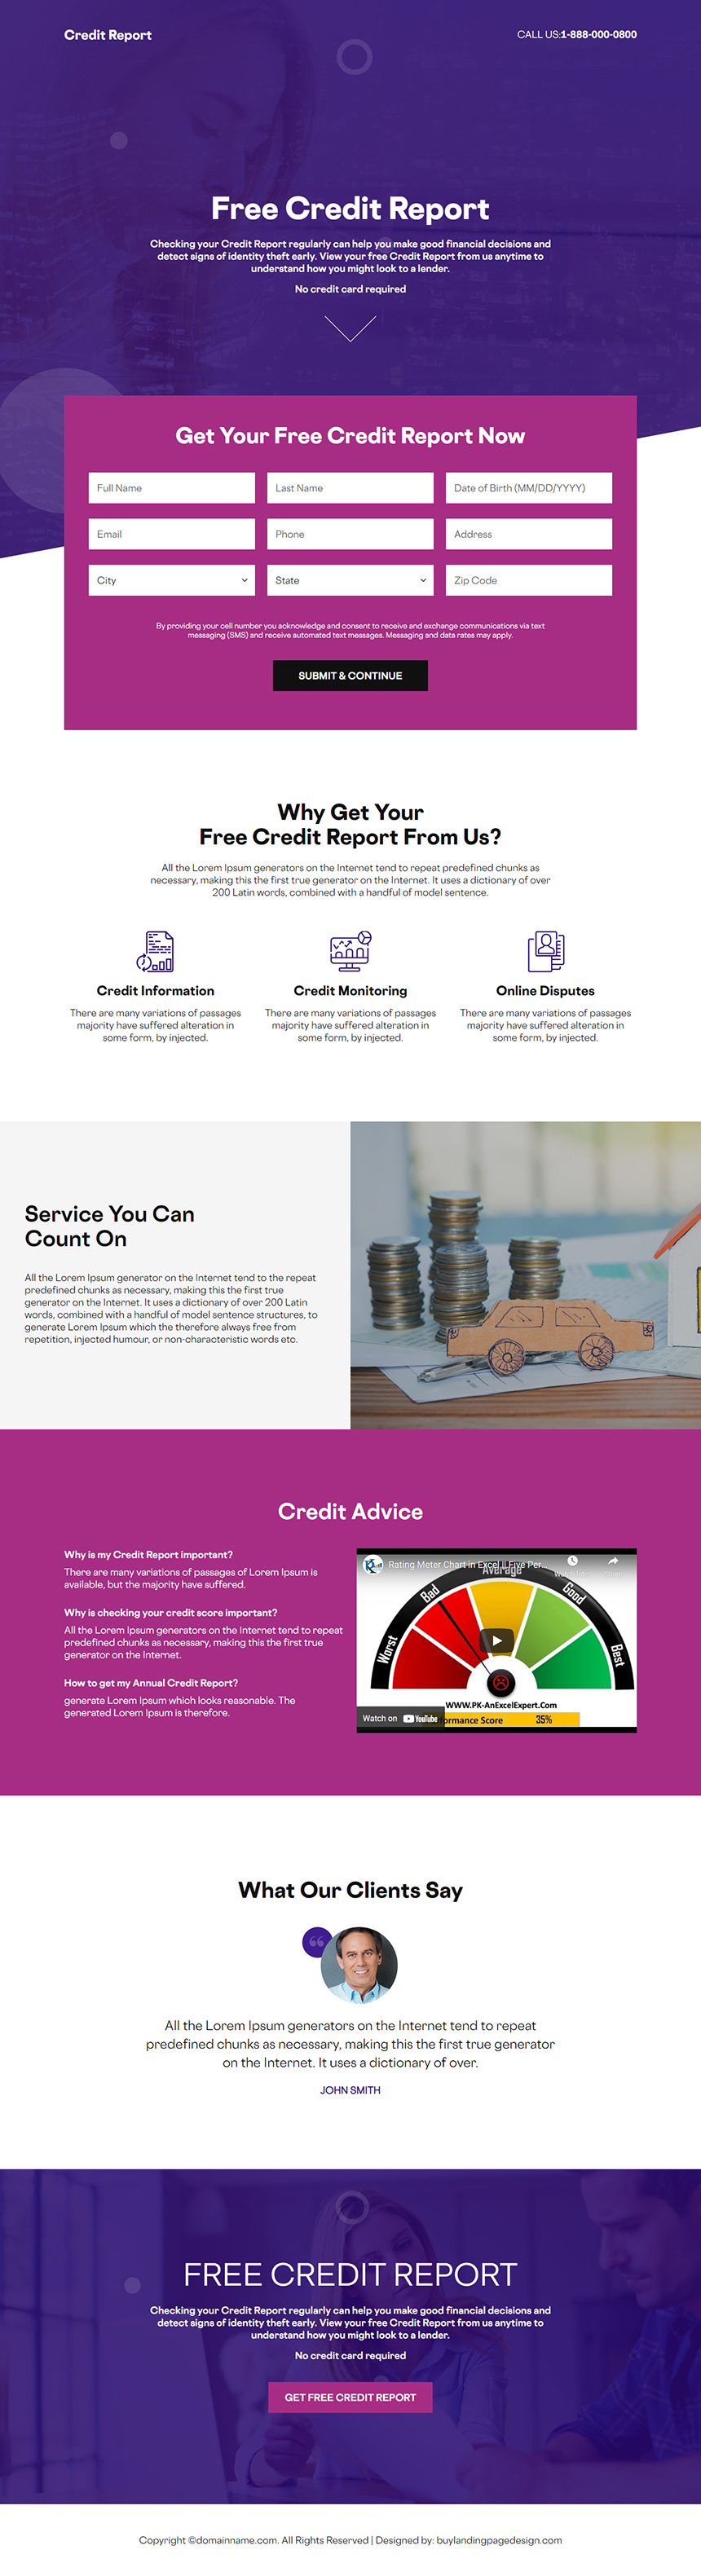 get free credit report lead capture landing page